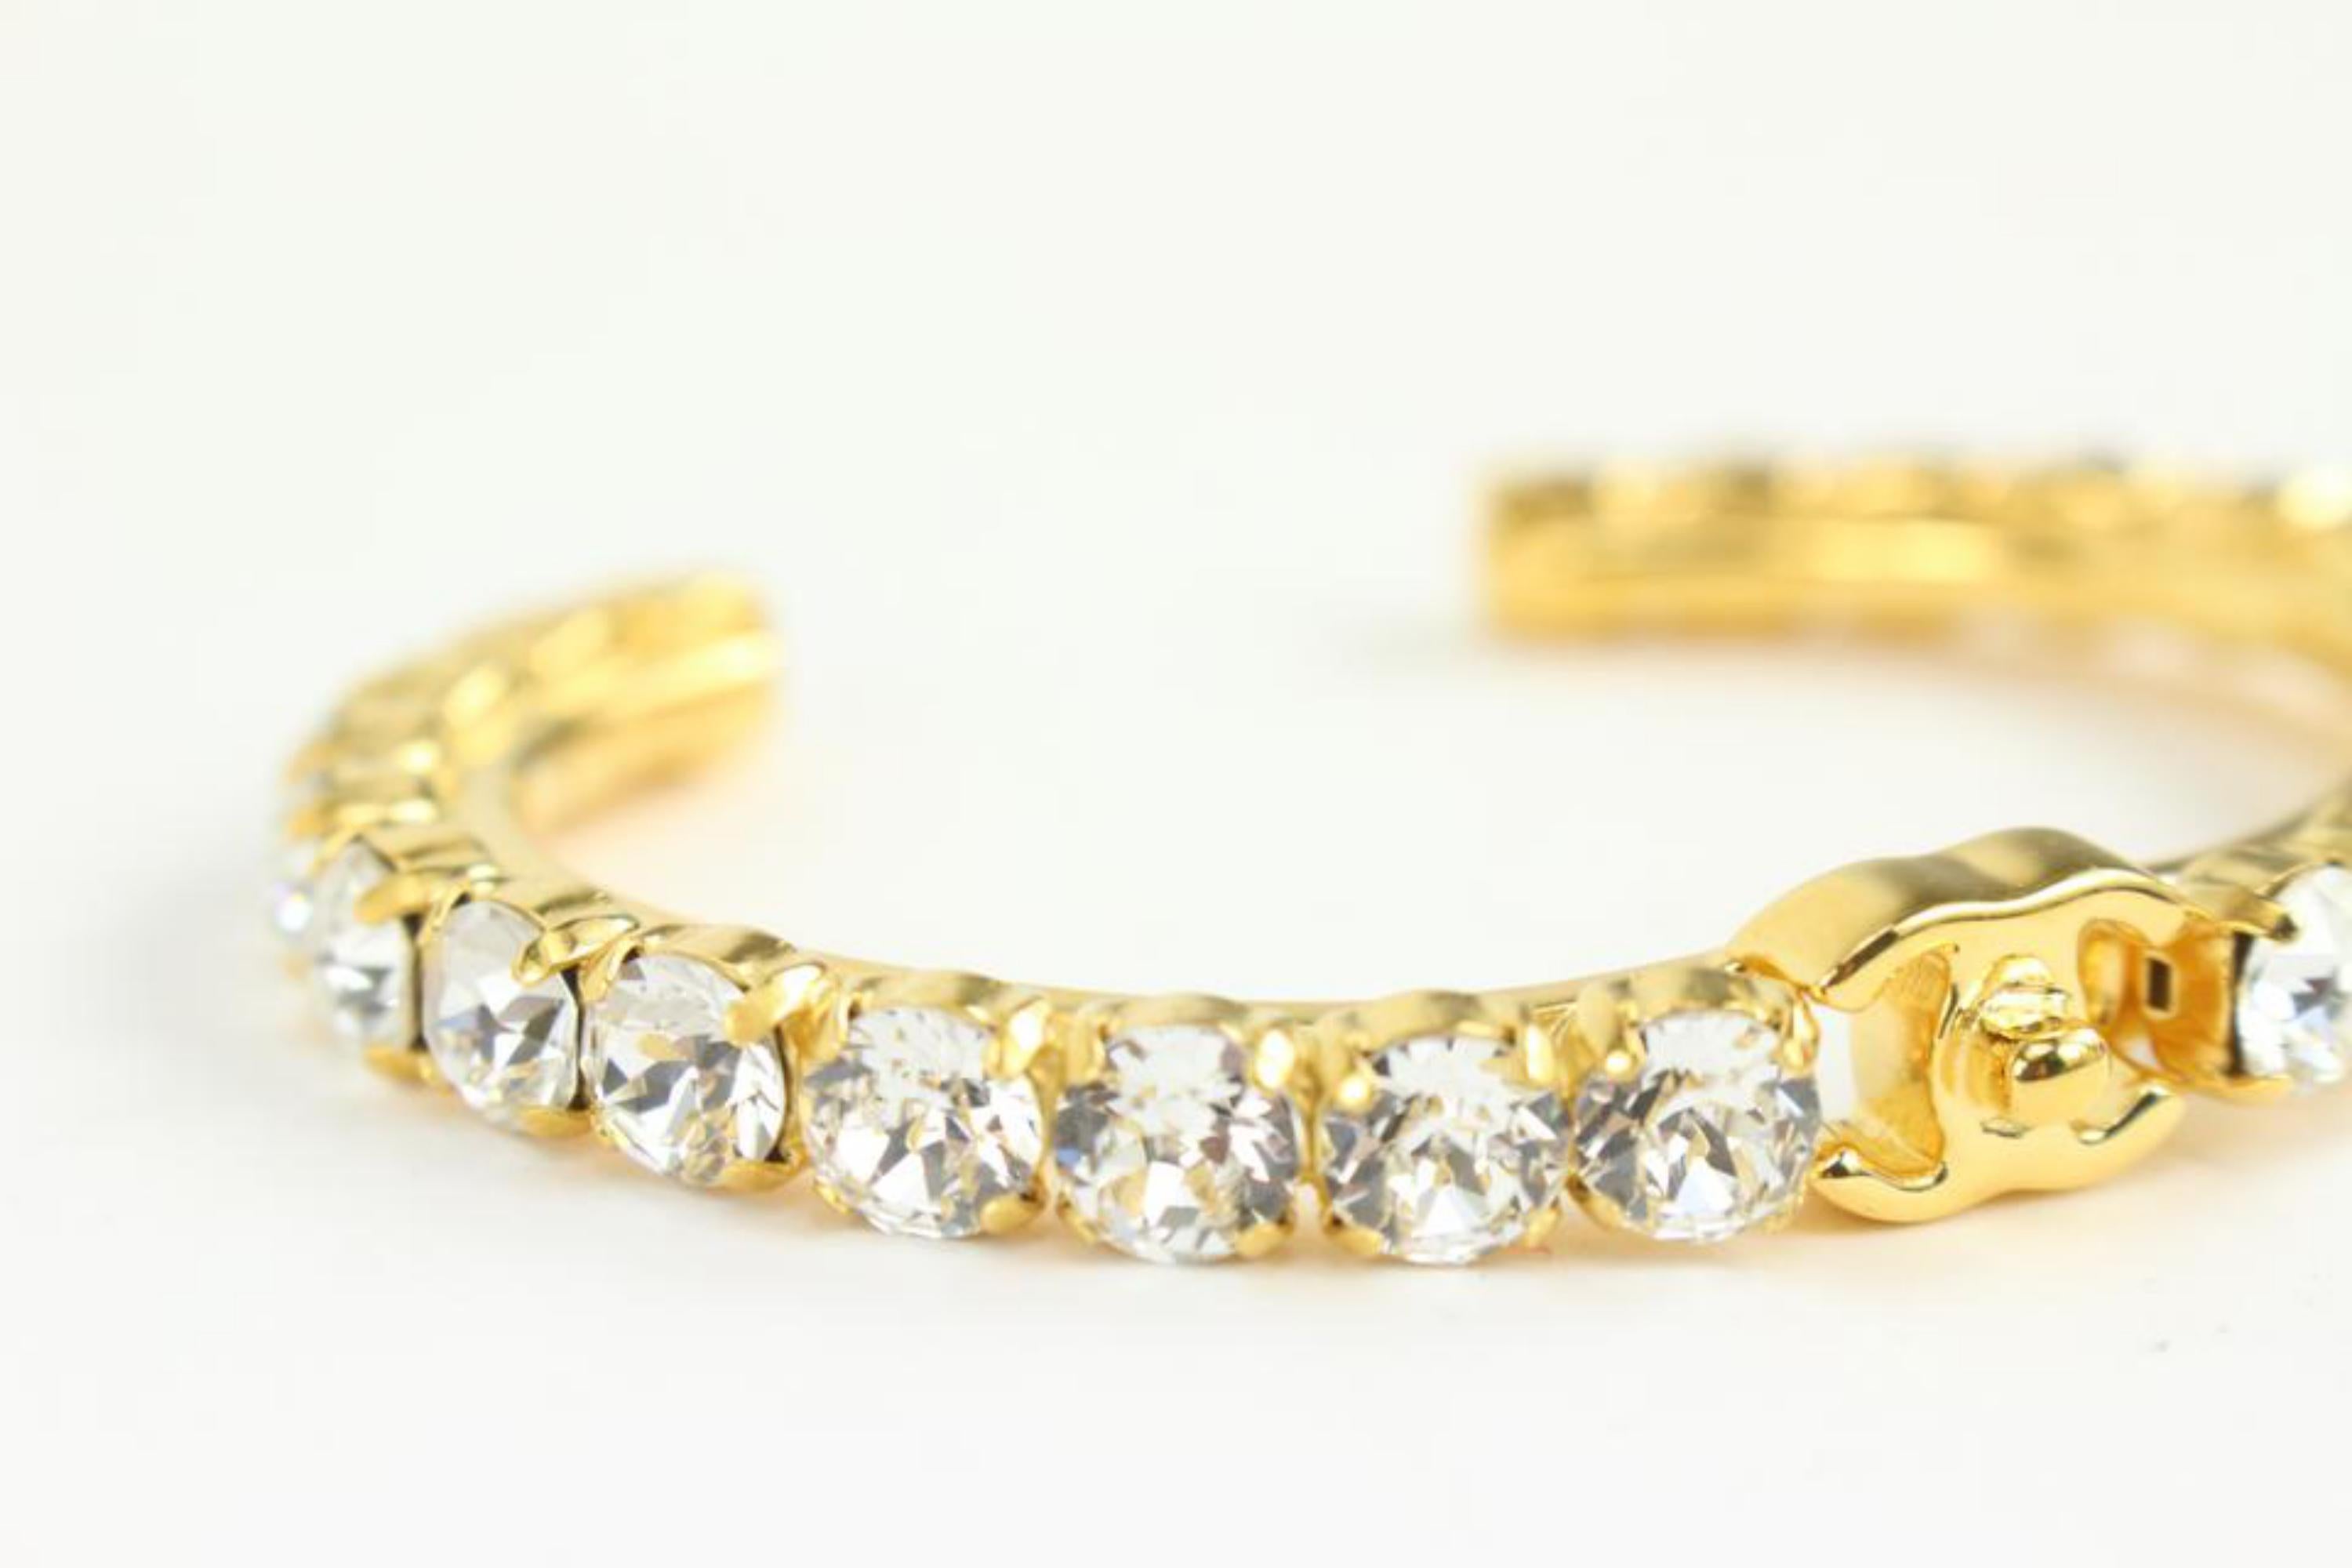 Chanel B20A Gold Crystal More is More CC Turnlock Bangle Bracelet Cuff 1118c6
Date Code/Serial Number: B20 A
Made In: Italy
Measurements: Length:  2.75